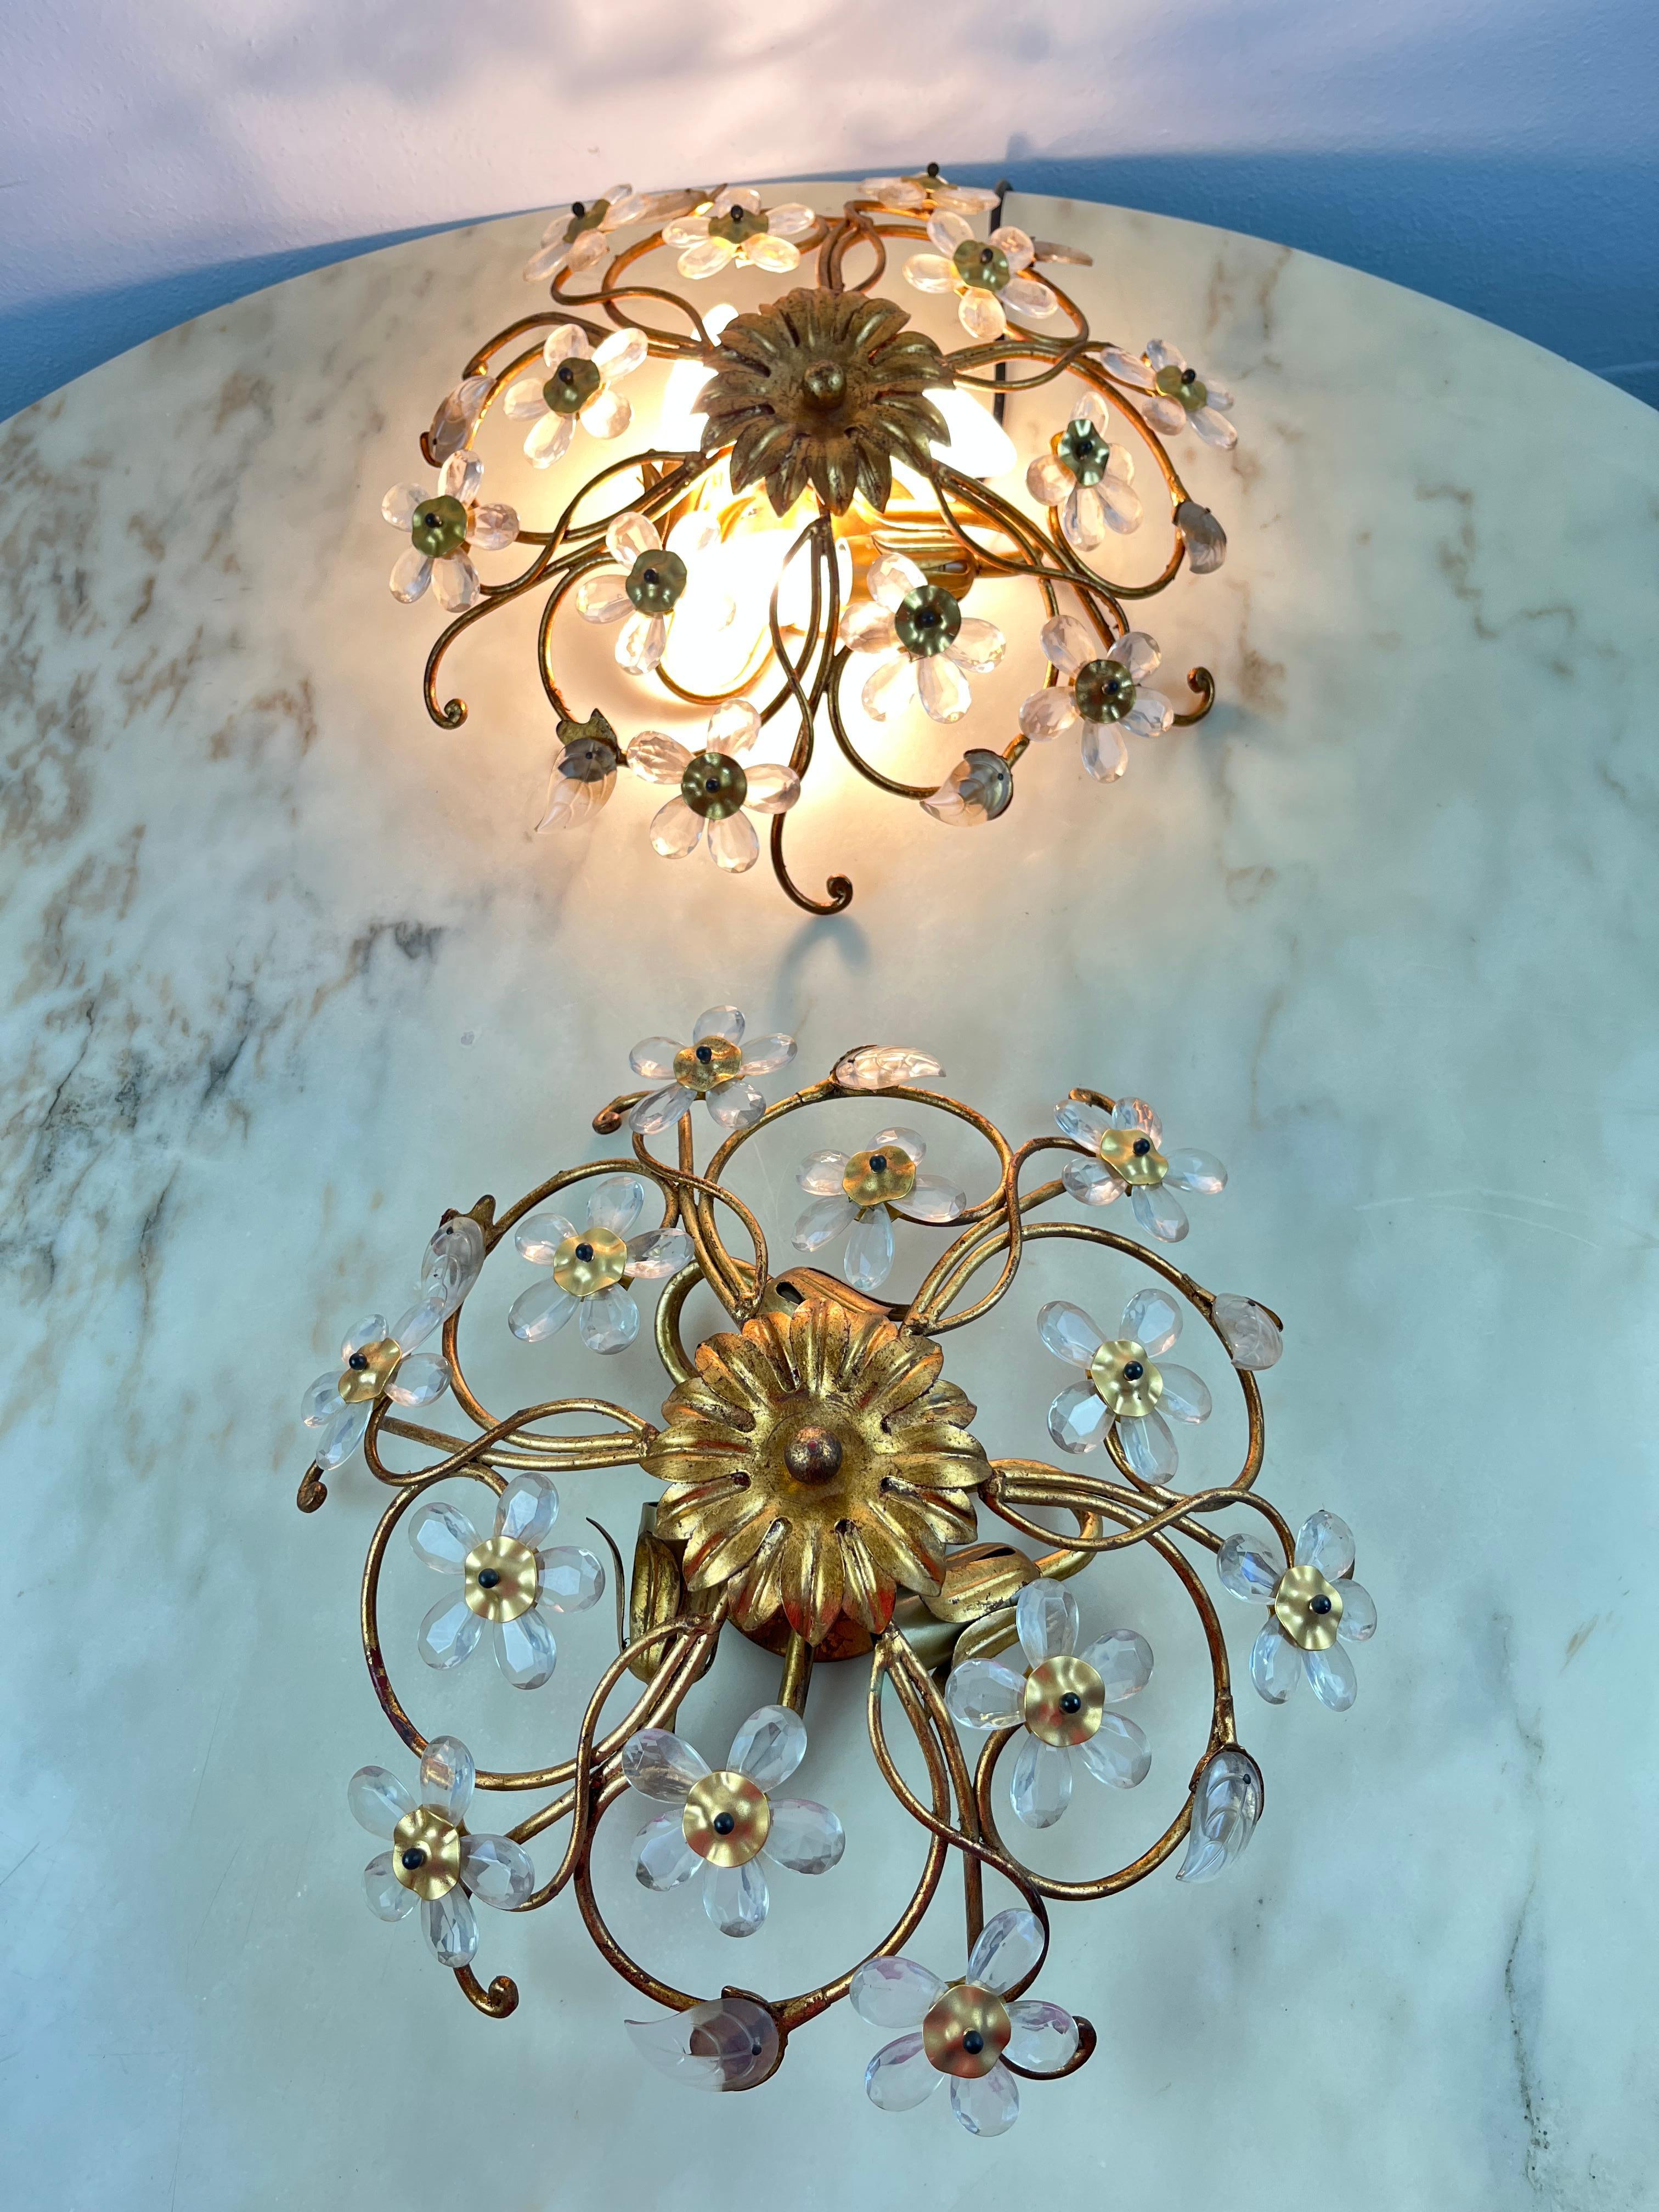 Pair of wrought iron and crystal ceiling lights, three lights, Italy, 1960s
Belonged to my grandparents. Intact and functional. Small signs of the time.